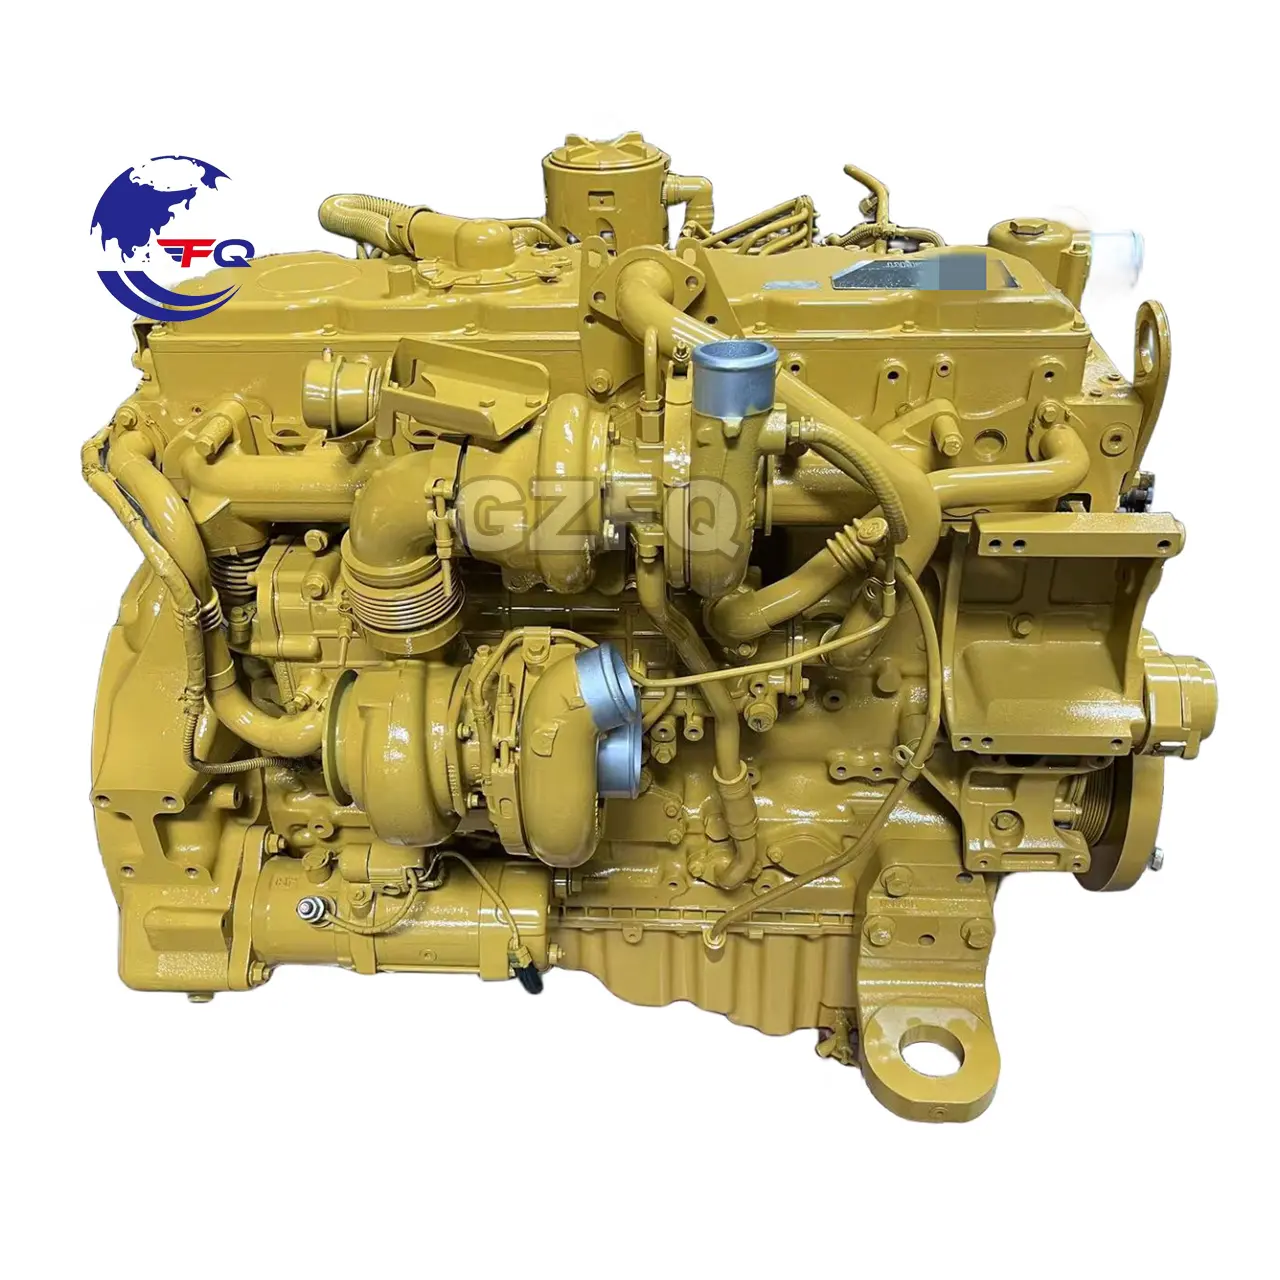 Original Caterpillar C7.1 C15 C27 C18 C9.3 C9 C4.4 C6.6 C7 C11 C13 C32 3408 3204 3116 3066 Engine assembly for CAT excavator